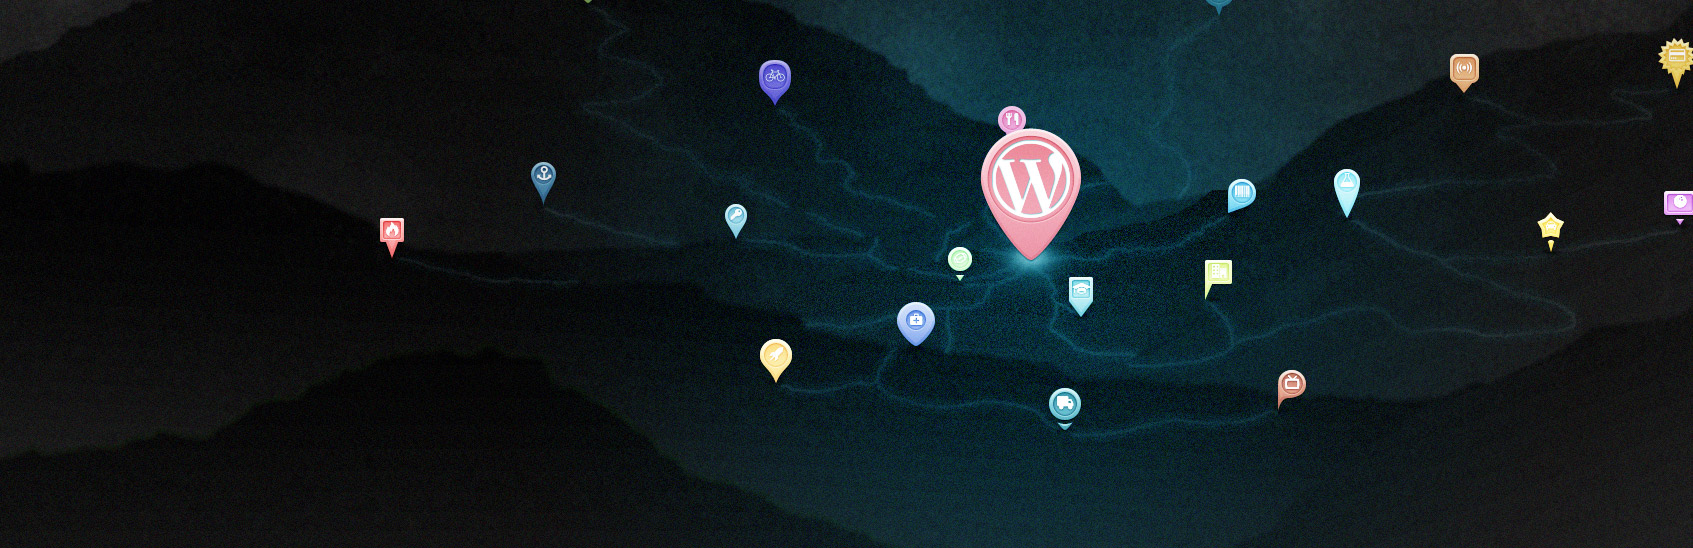 Nearby Map By Wabeo Preview Wordpress Plugin - Rating, Reviews, Demo & Download